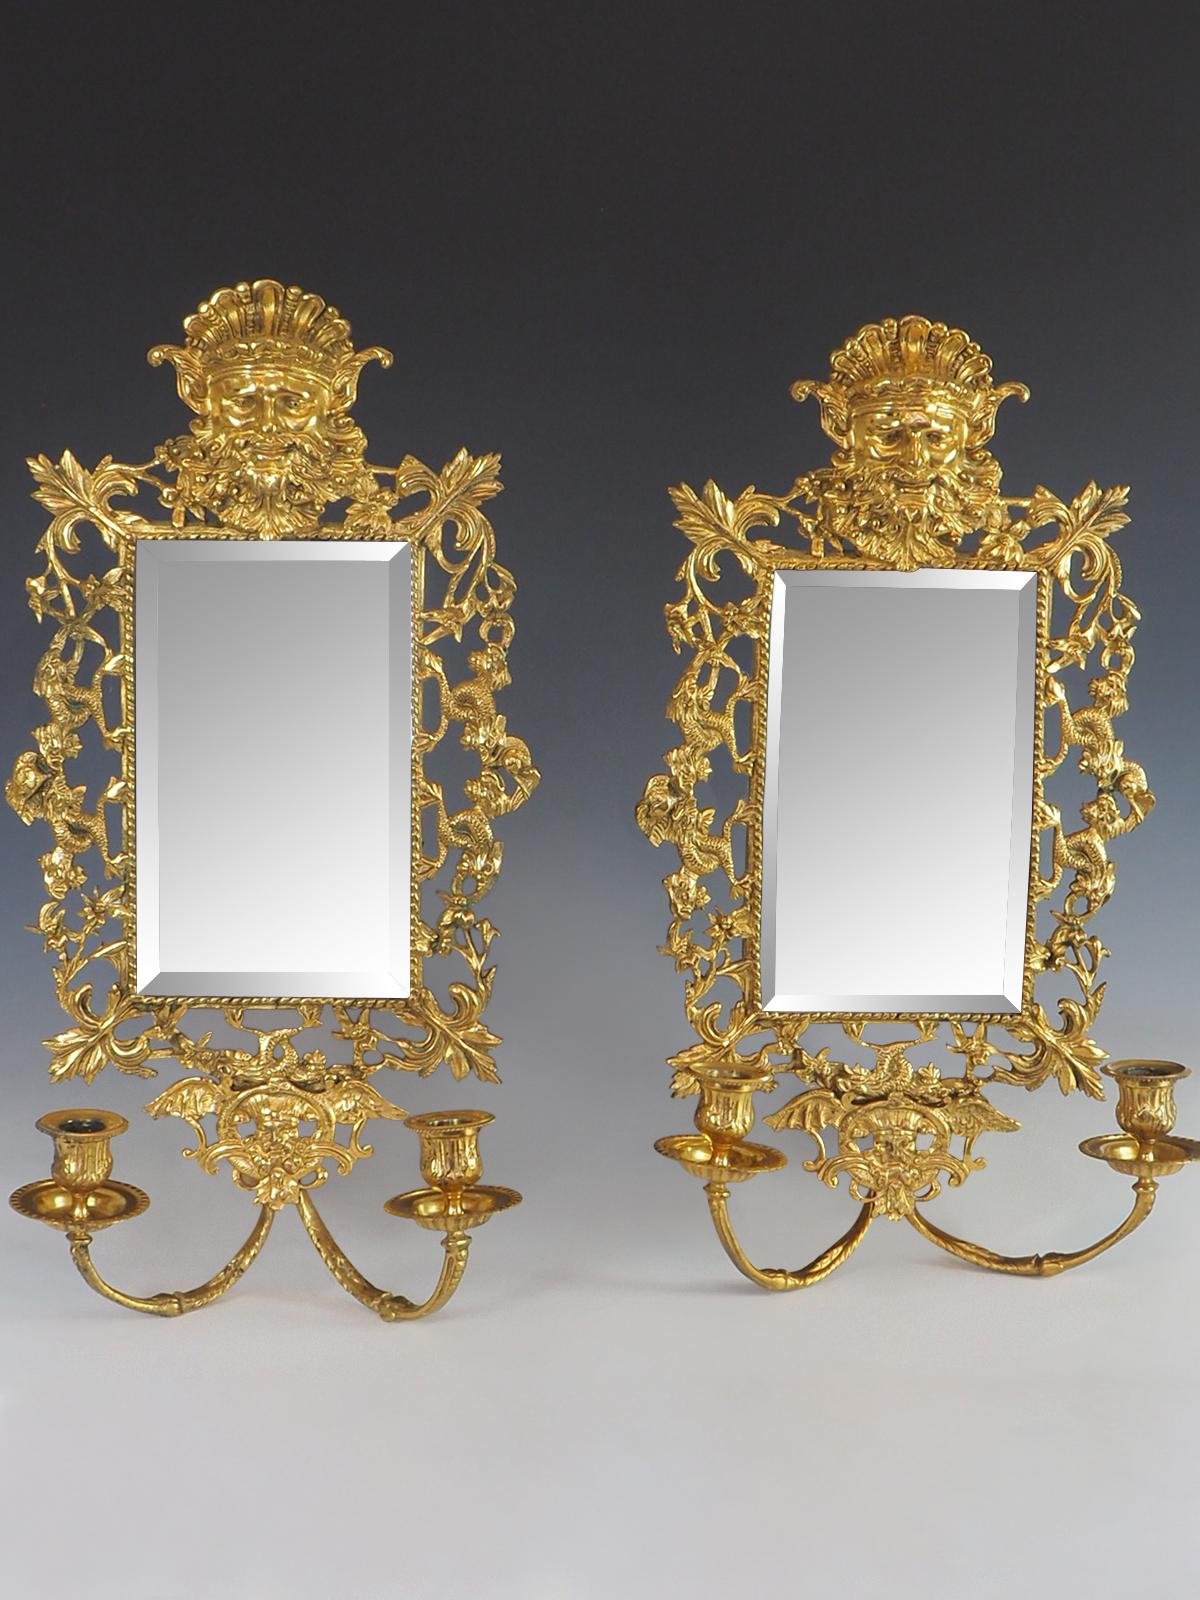 Pair of 19th Century 'Girandole' Italian Mirrored Wall Sconces

A stunning twin arm pair of wall scones headed by Neptune, the sea god, and surrounded by lots of mythical grotesque sea creatures.

The central mirror is beveled

Stamped JJ

This type